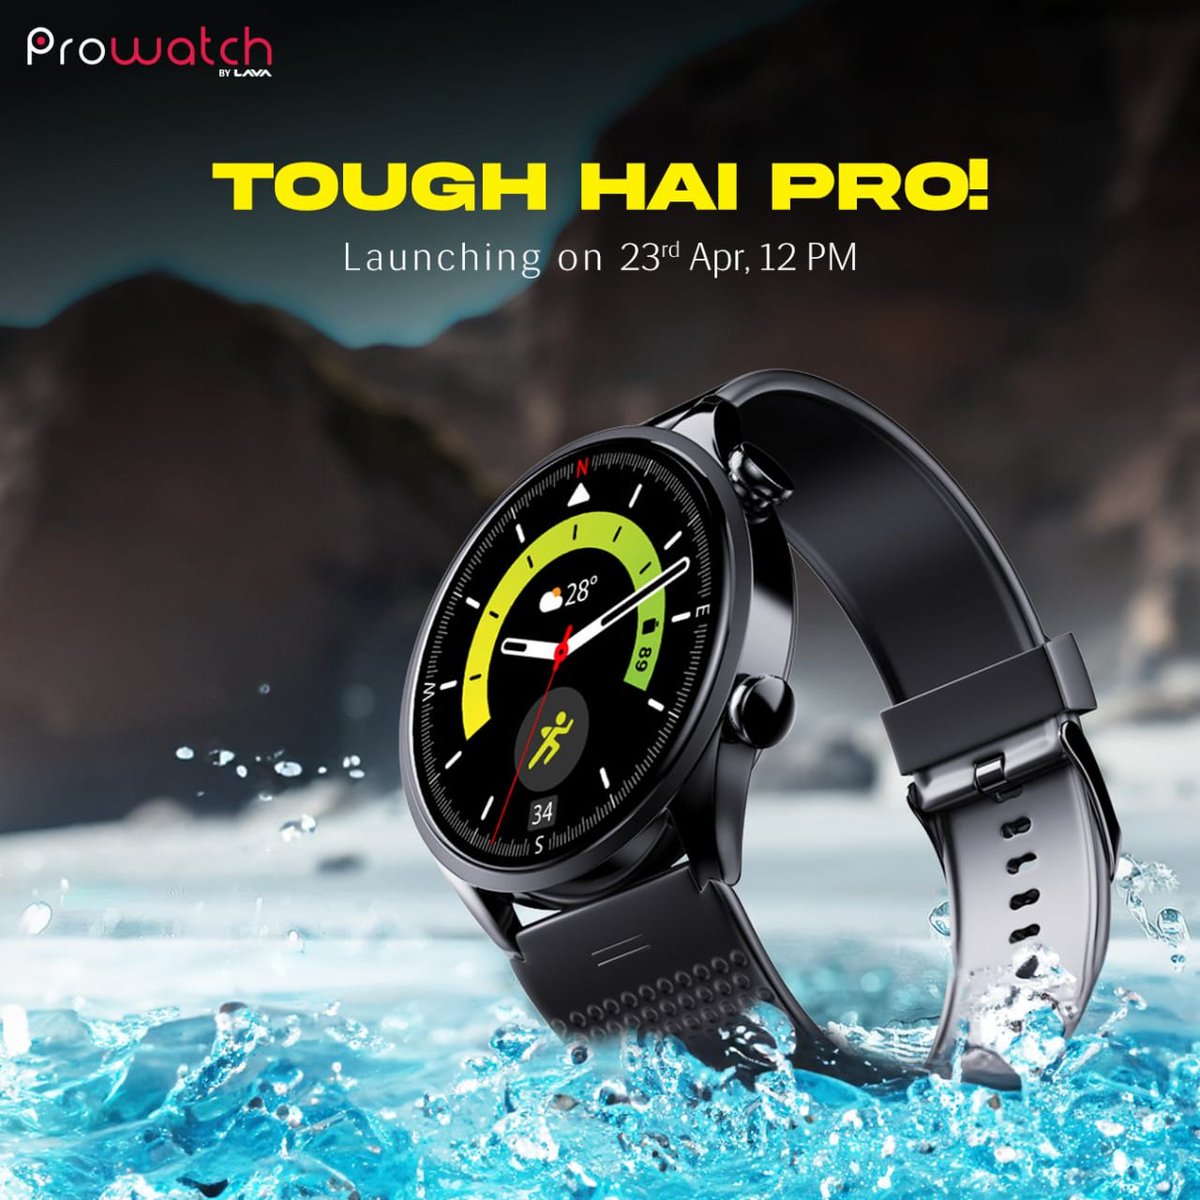 Get ready to elevate your wearable experience! ⌚️ #ProwatchLaunchTomorrow is launching on April 23rd with revolutionary features, including Gorilla Glass 3 protection and state-of-the-art sensors. Don't miss out!